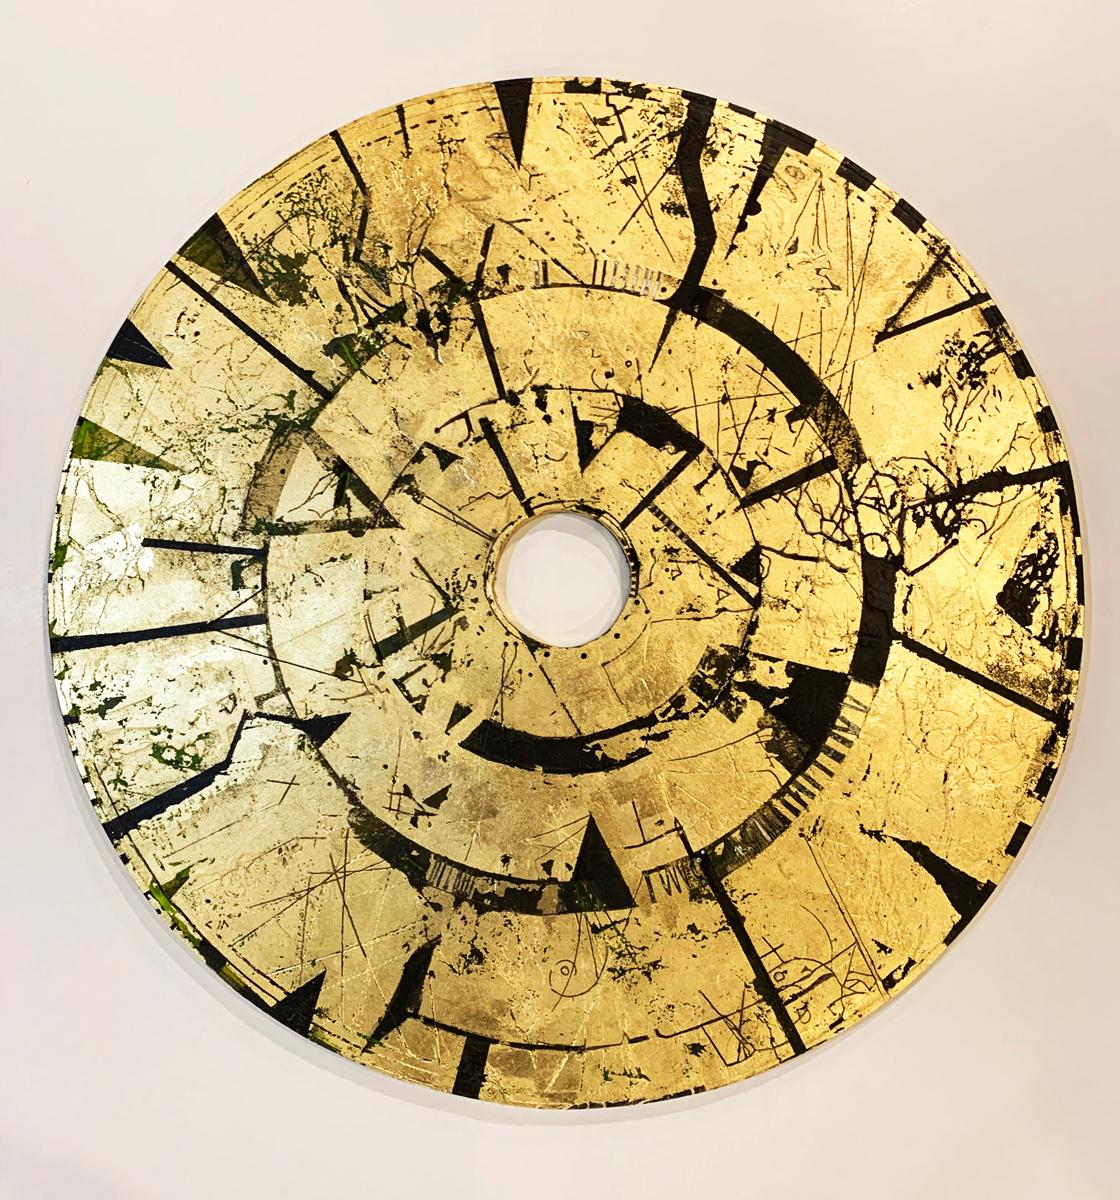 Nemetona Disc - Contemporary Mixed media artwork, Gold leaf on wood - Painting by Russell Frampton